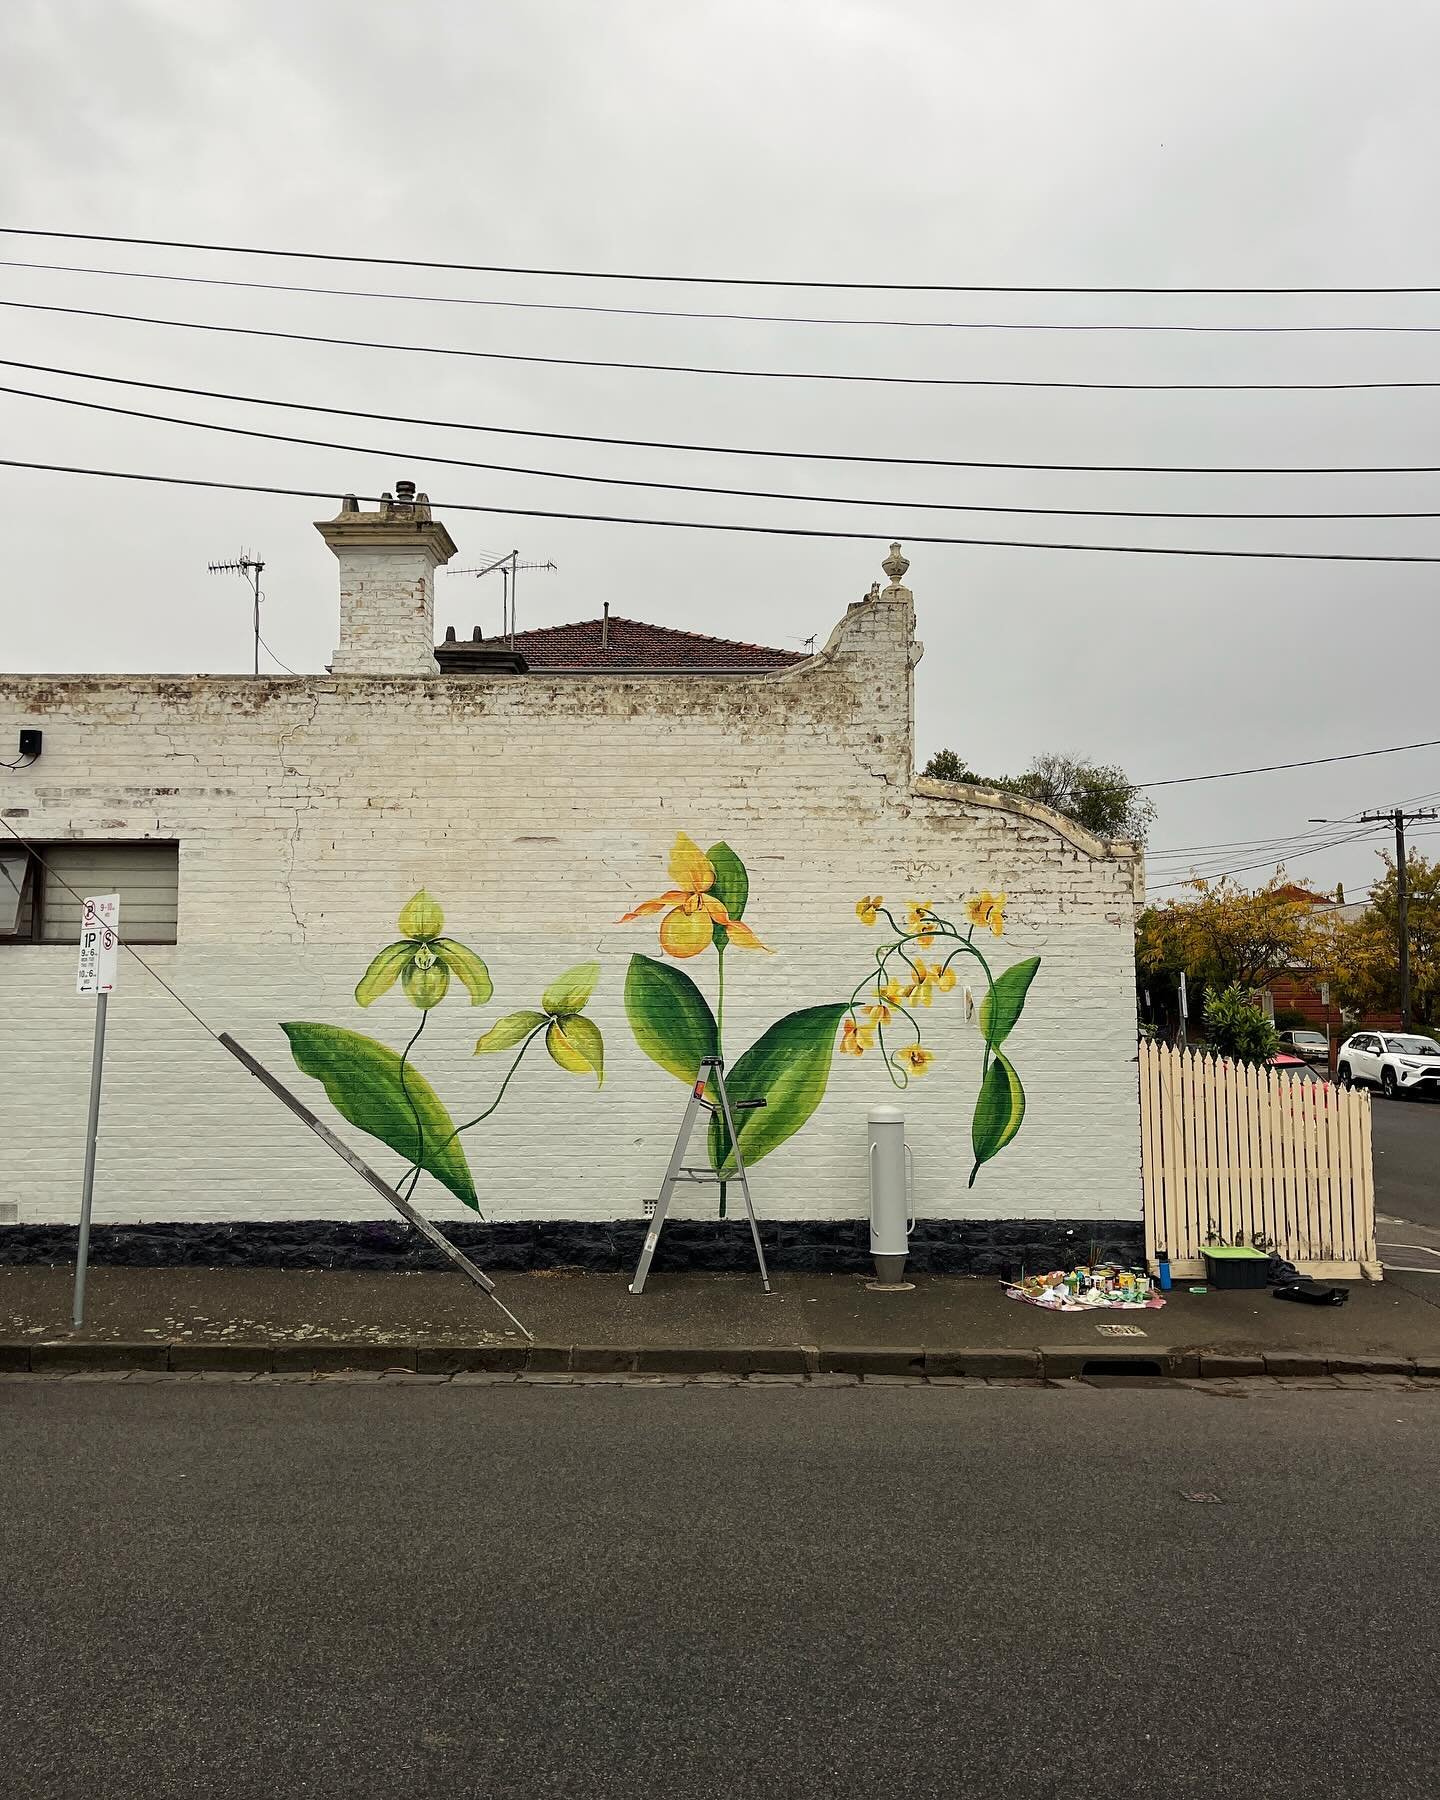 Yesterday I completed this residential orchid mural. The best part about it was chatting to passers by and neighbours who loved the addition of more nature in the area. Everyone was so encouraging. I learnt a Turkish phrase - Kolay gelsin - which mea